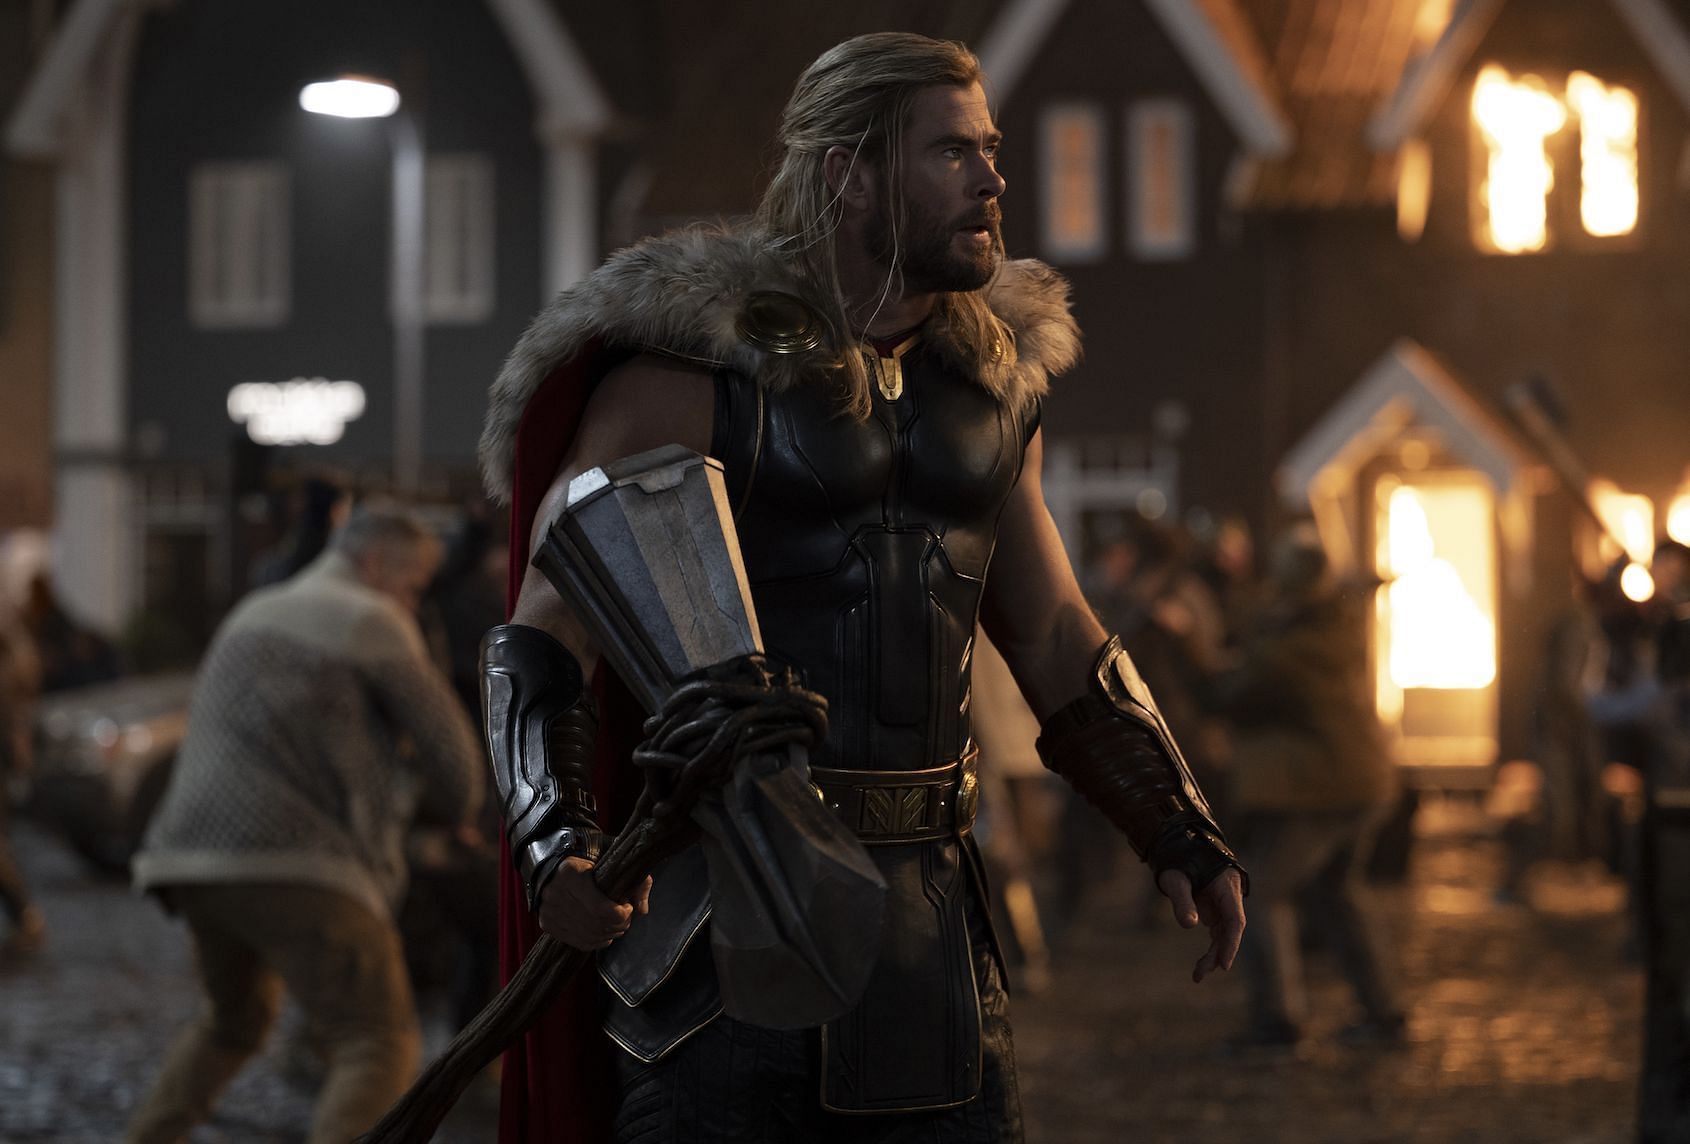 Chris Hemsworth&#039;s portrayal of Thor combined humor and bravery to make a loveable character (Image via Marvel Studios)